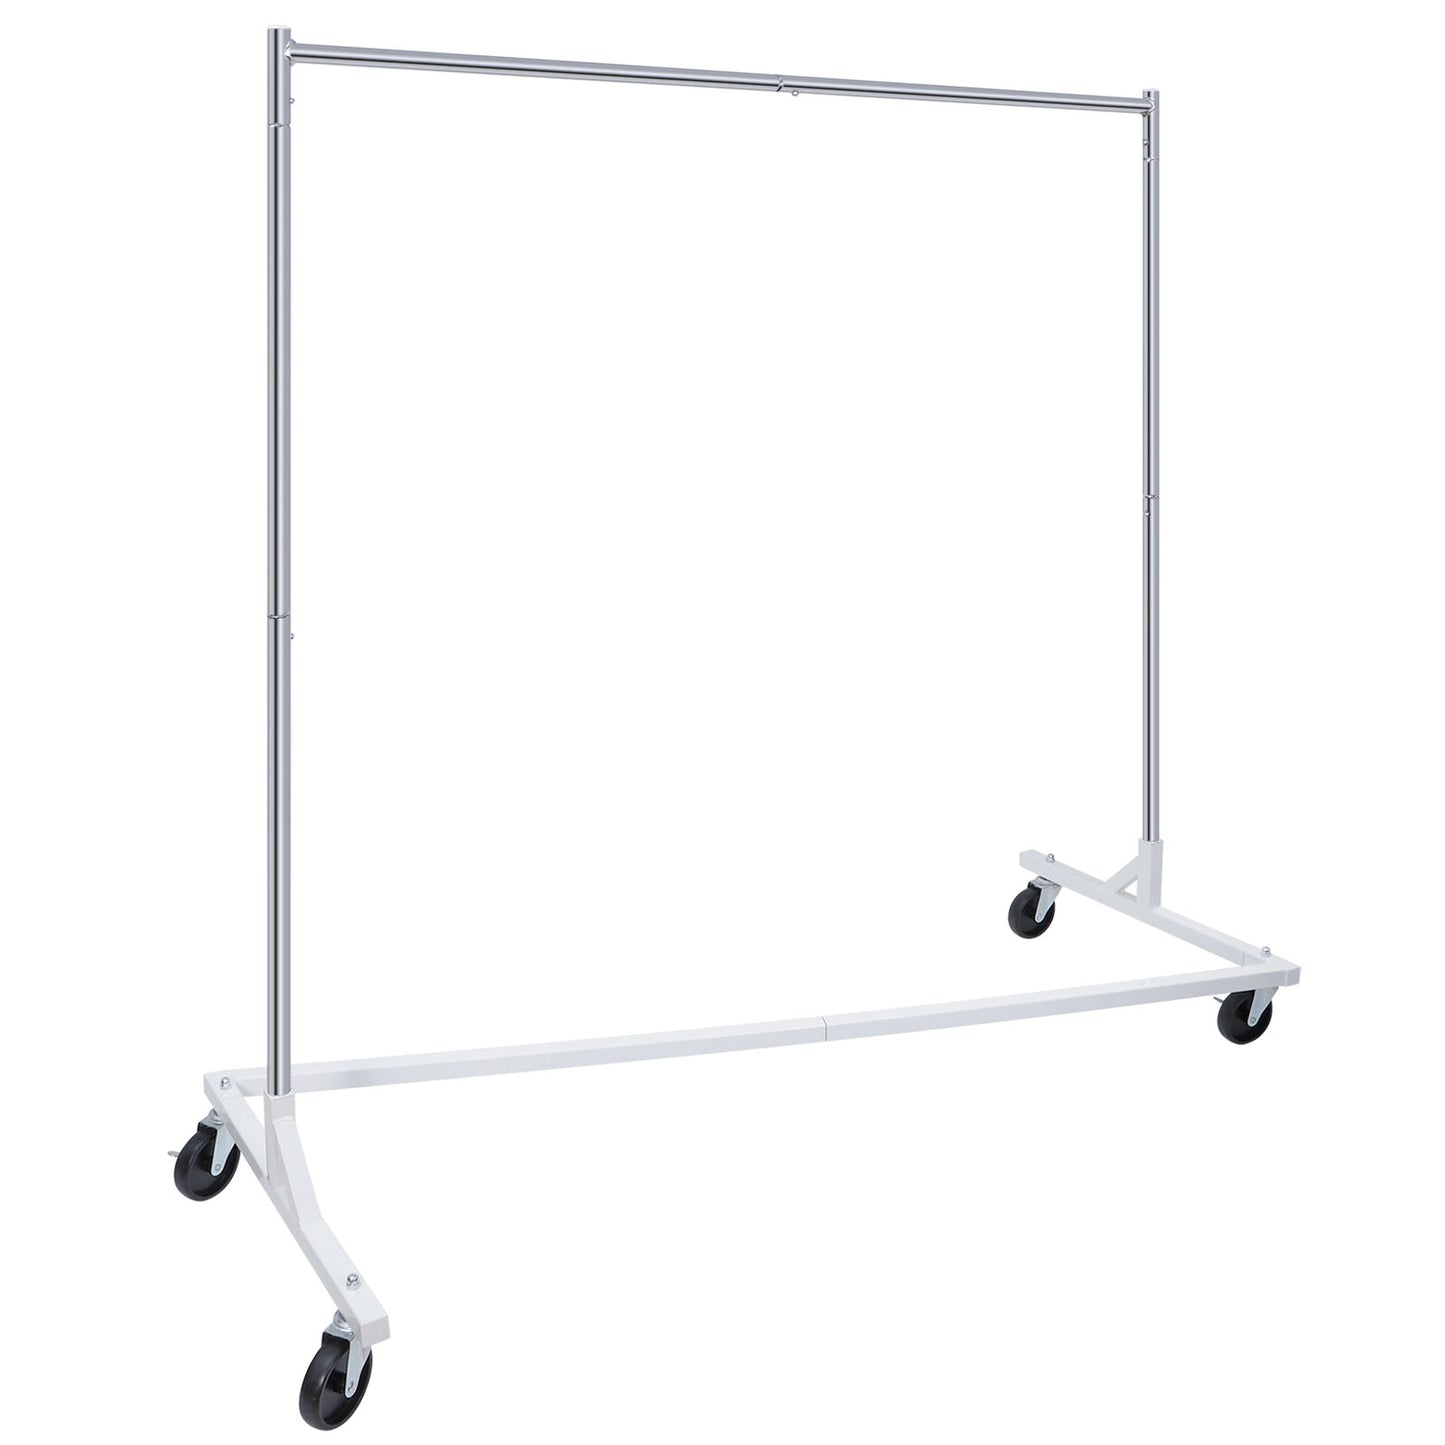 Commercial Garment Rack Rolling Collapsible Clothing Shelf Z-Base w/ Wheels